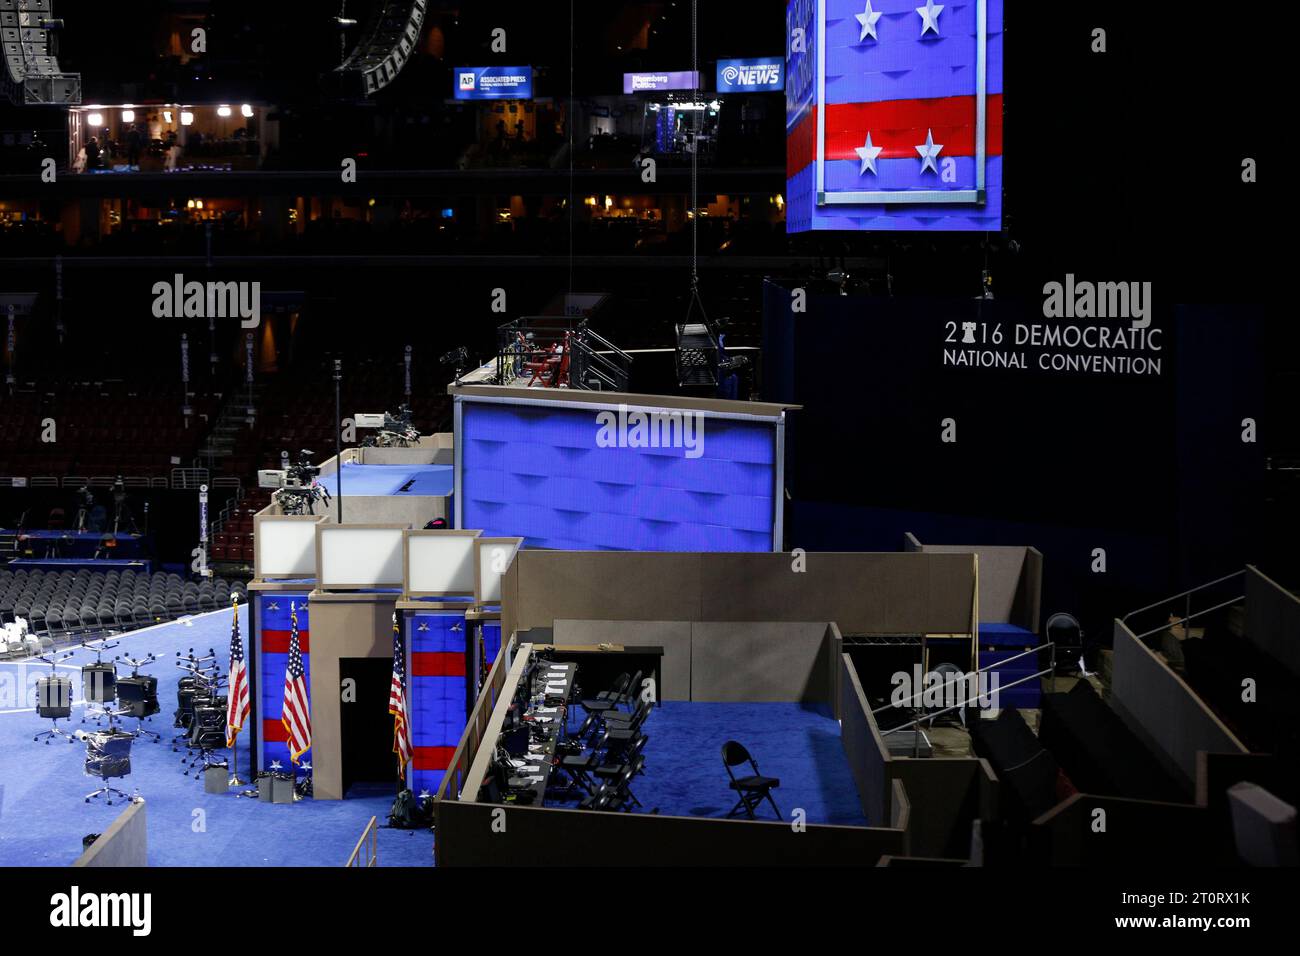 07272016 - Philadelphia, Pennsylvania, USA: Wells Fargo Arena is empty after delegates have gone home on the third day of the Democratic National Convention. (Jeremy Hogan/Polaris) Stock Photo